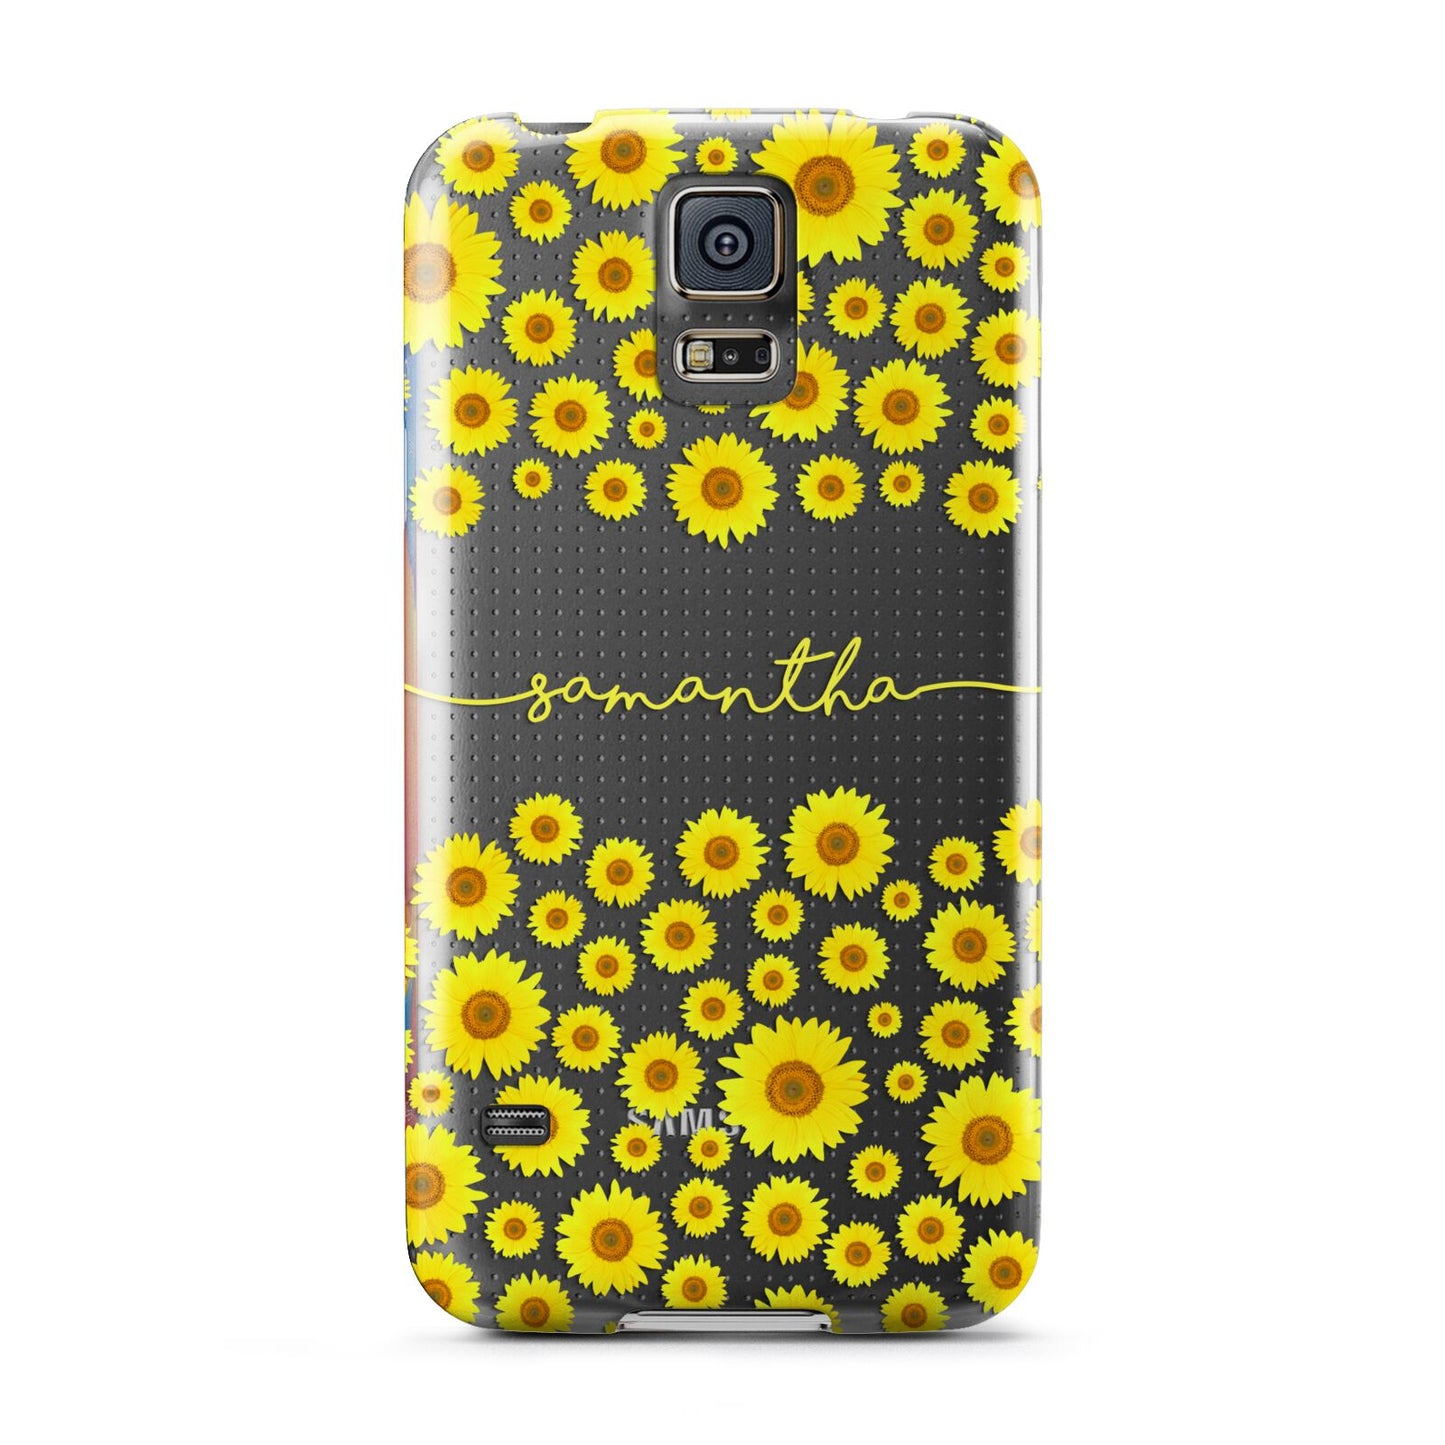 Personalised Sunflower Samsung Galaxy S5 Case